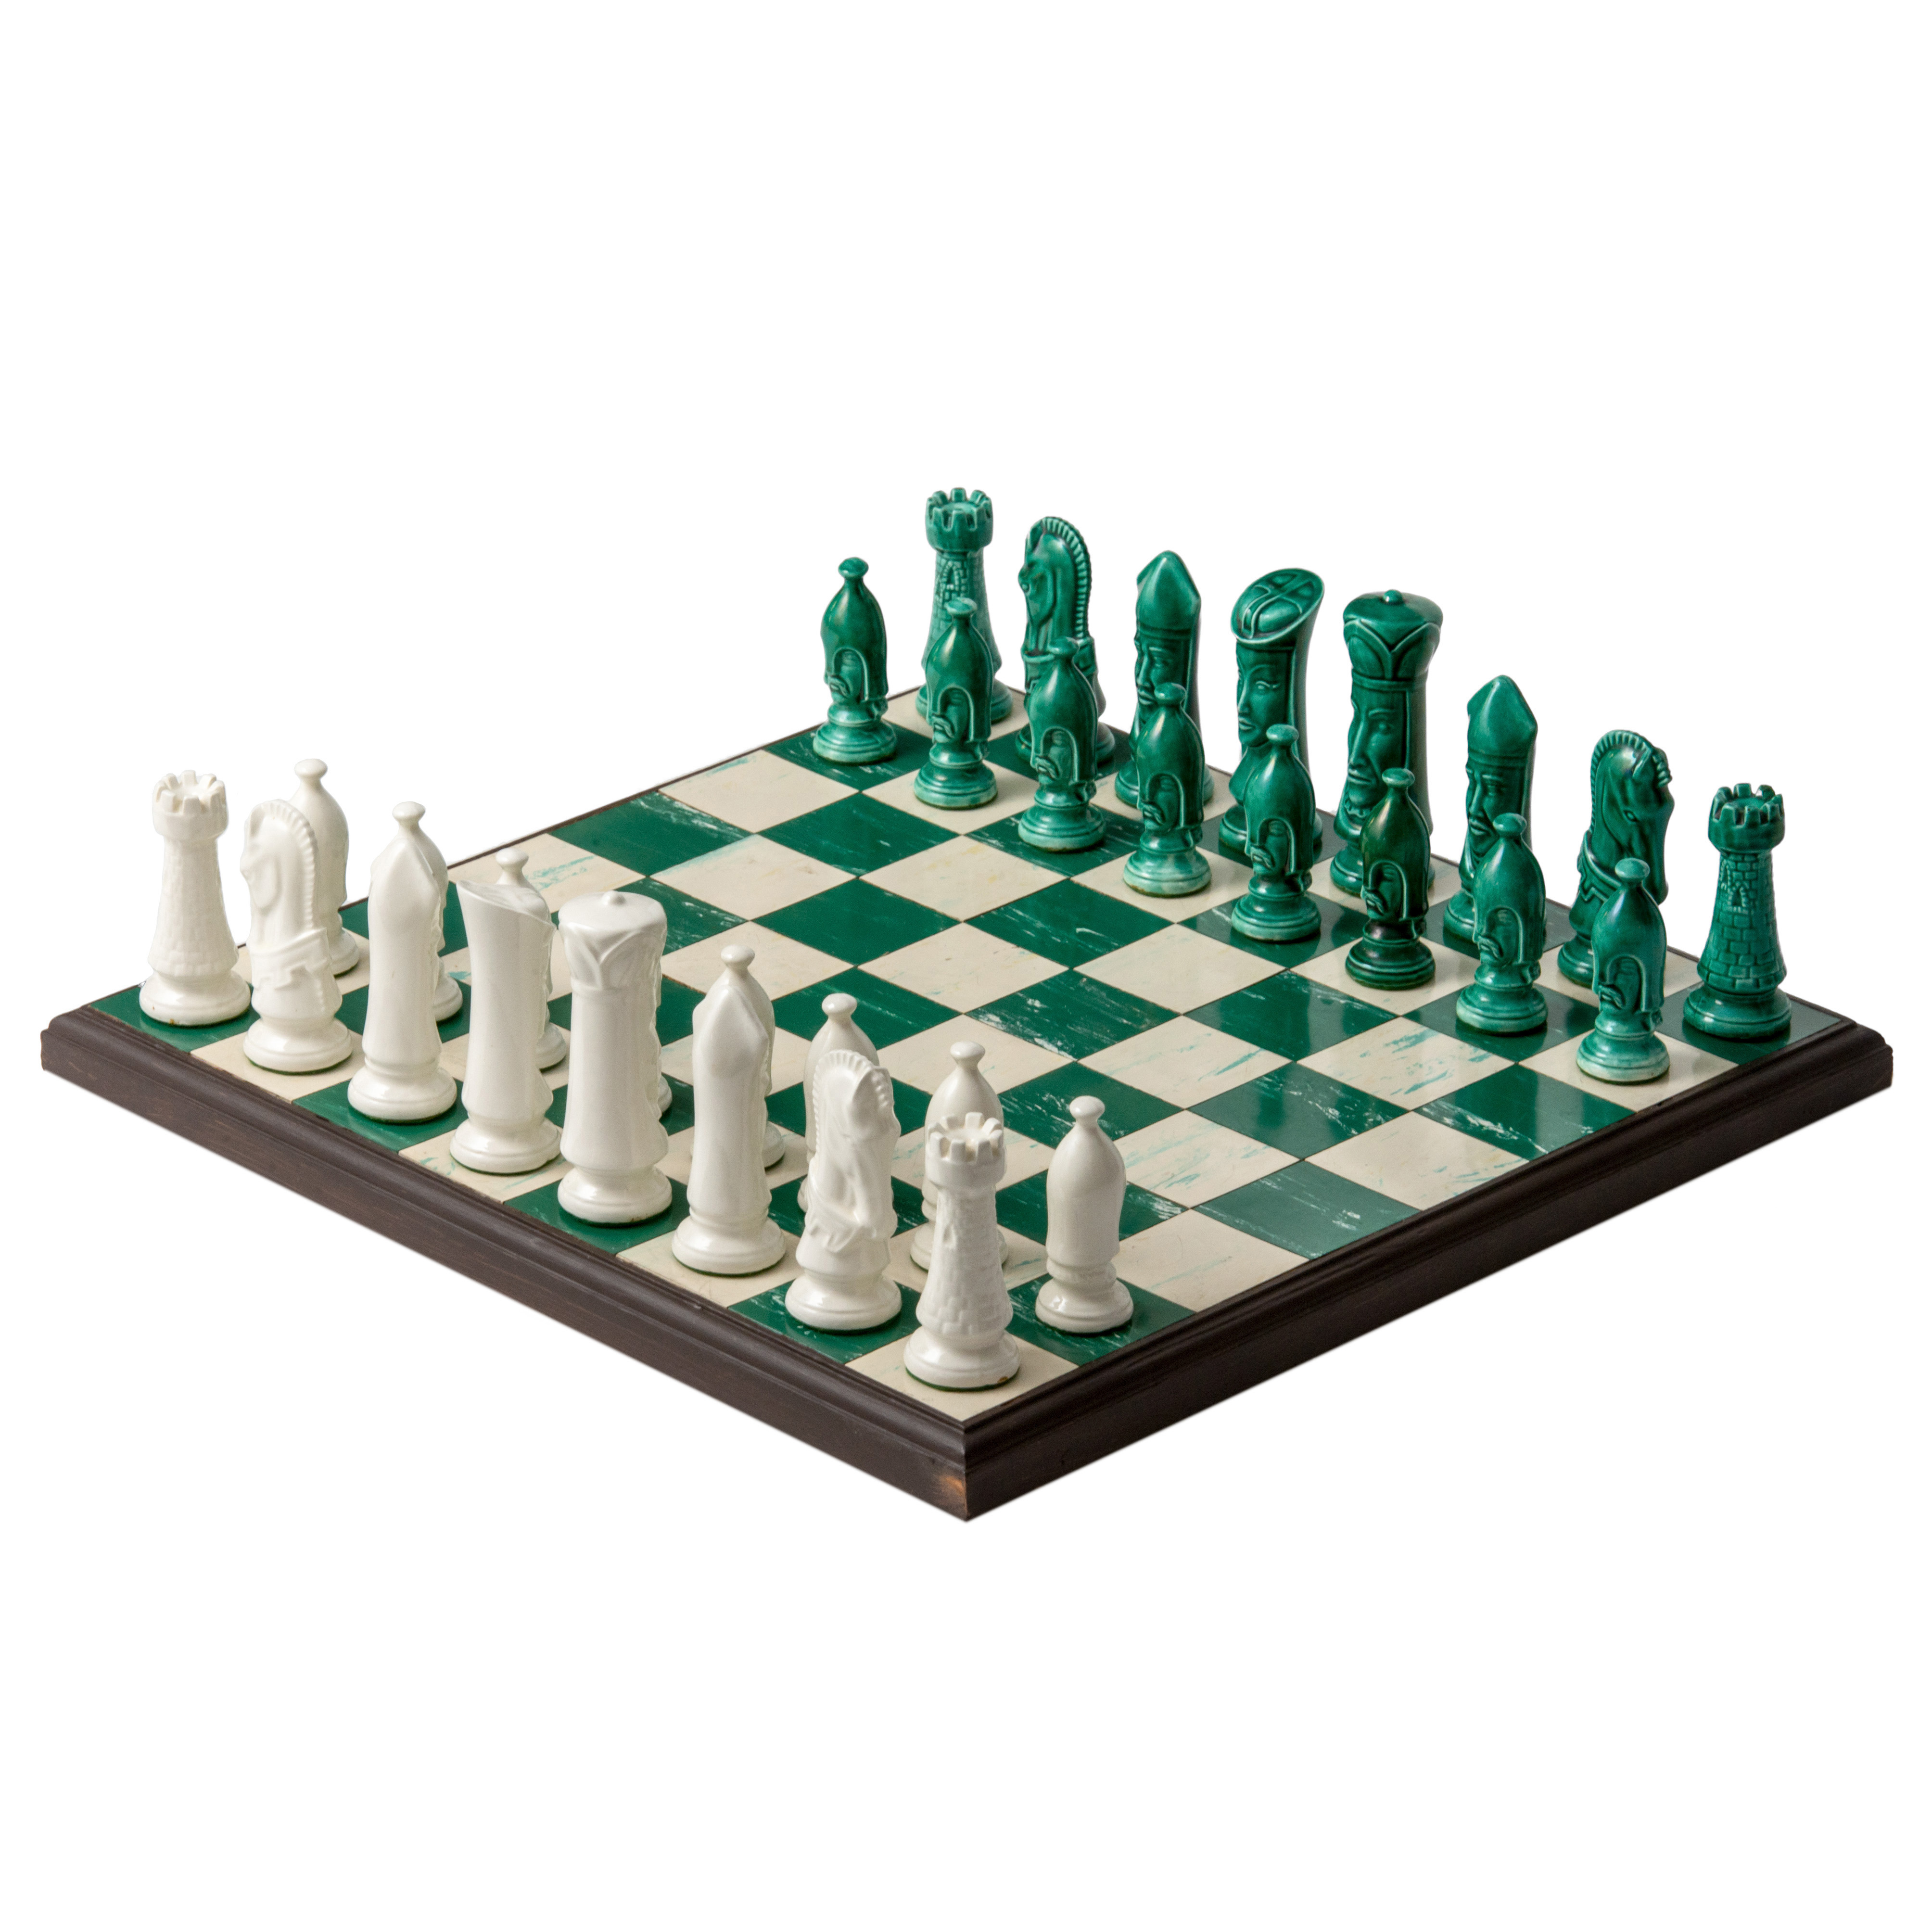 Scout-made chess set is now in World Chess Hall of Fame